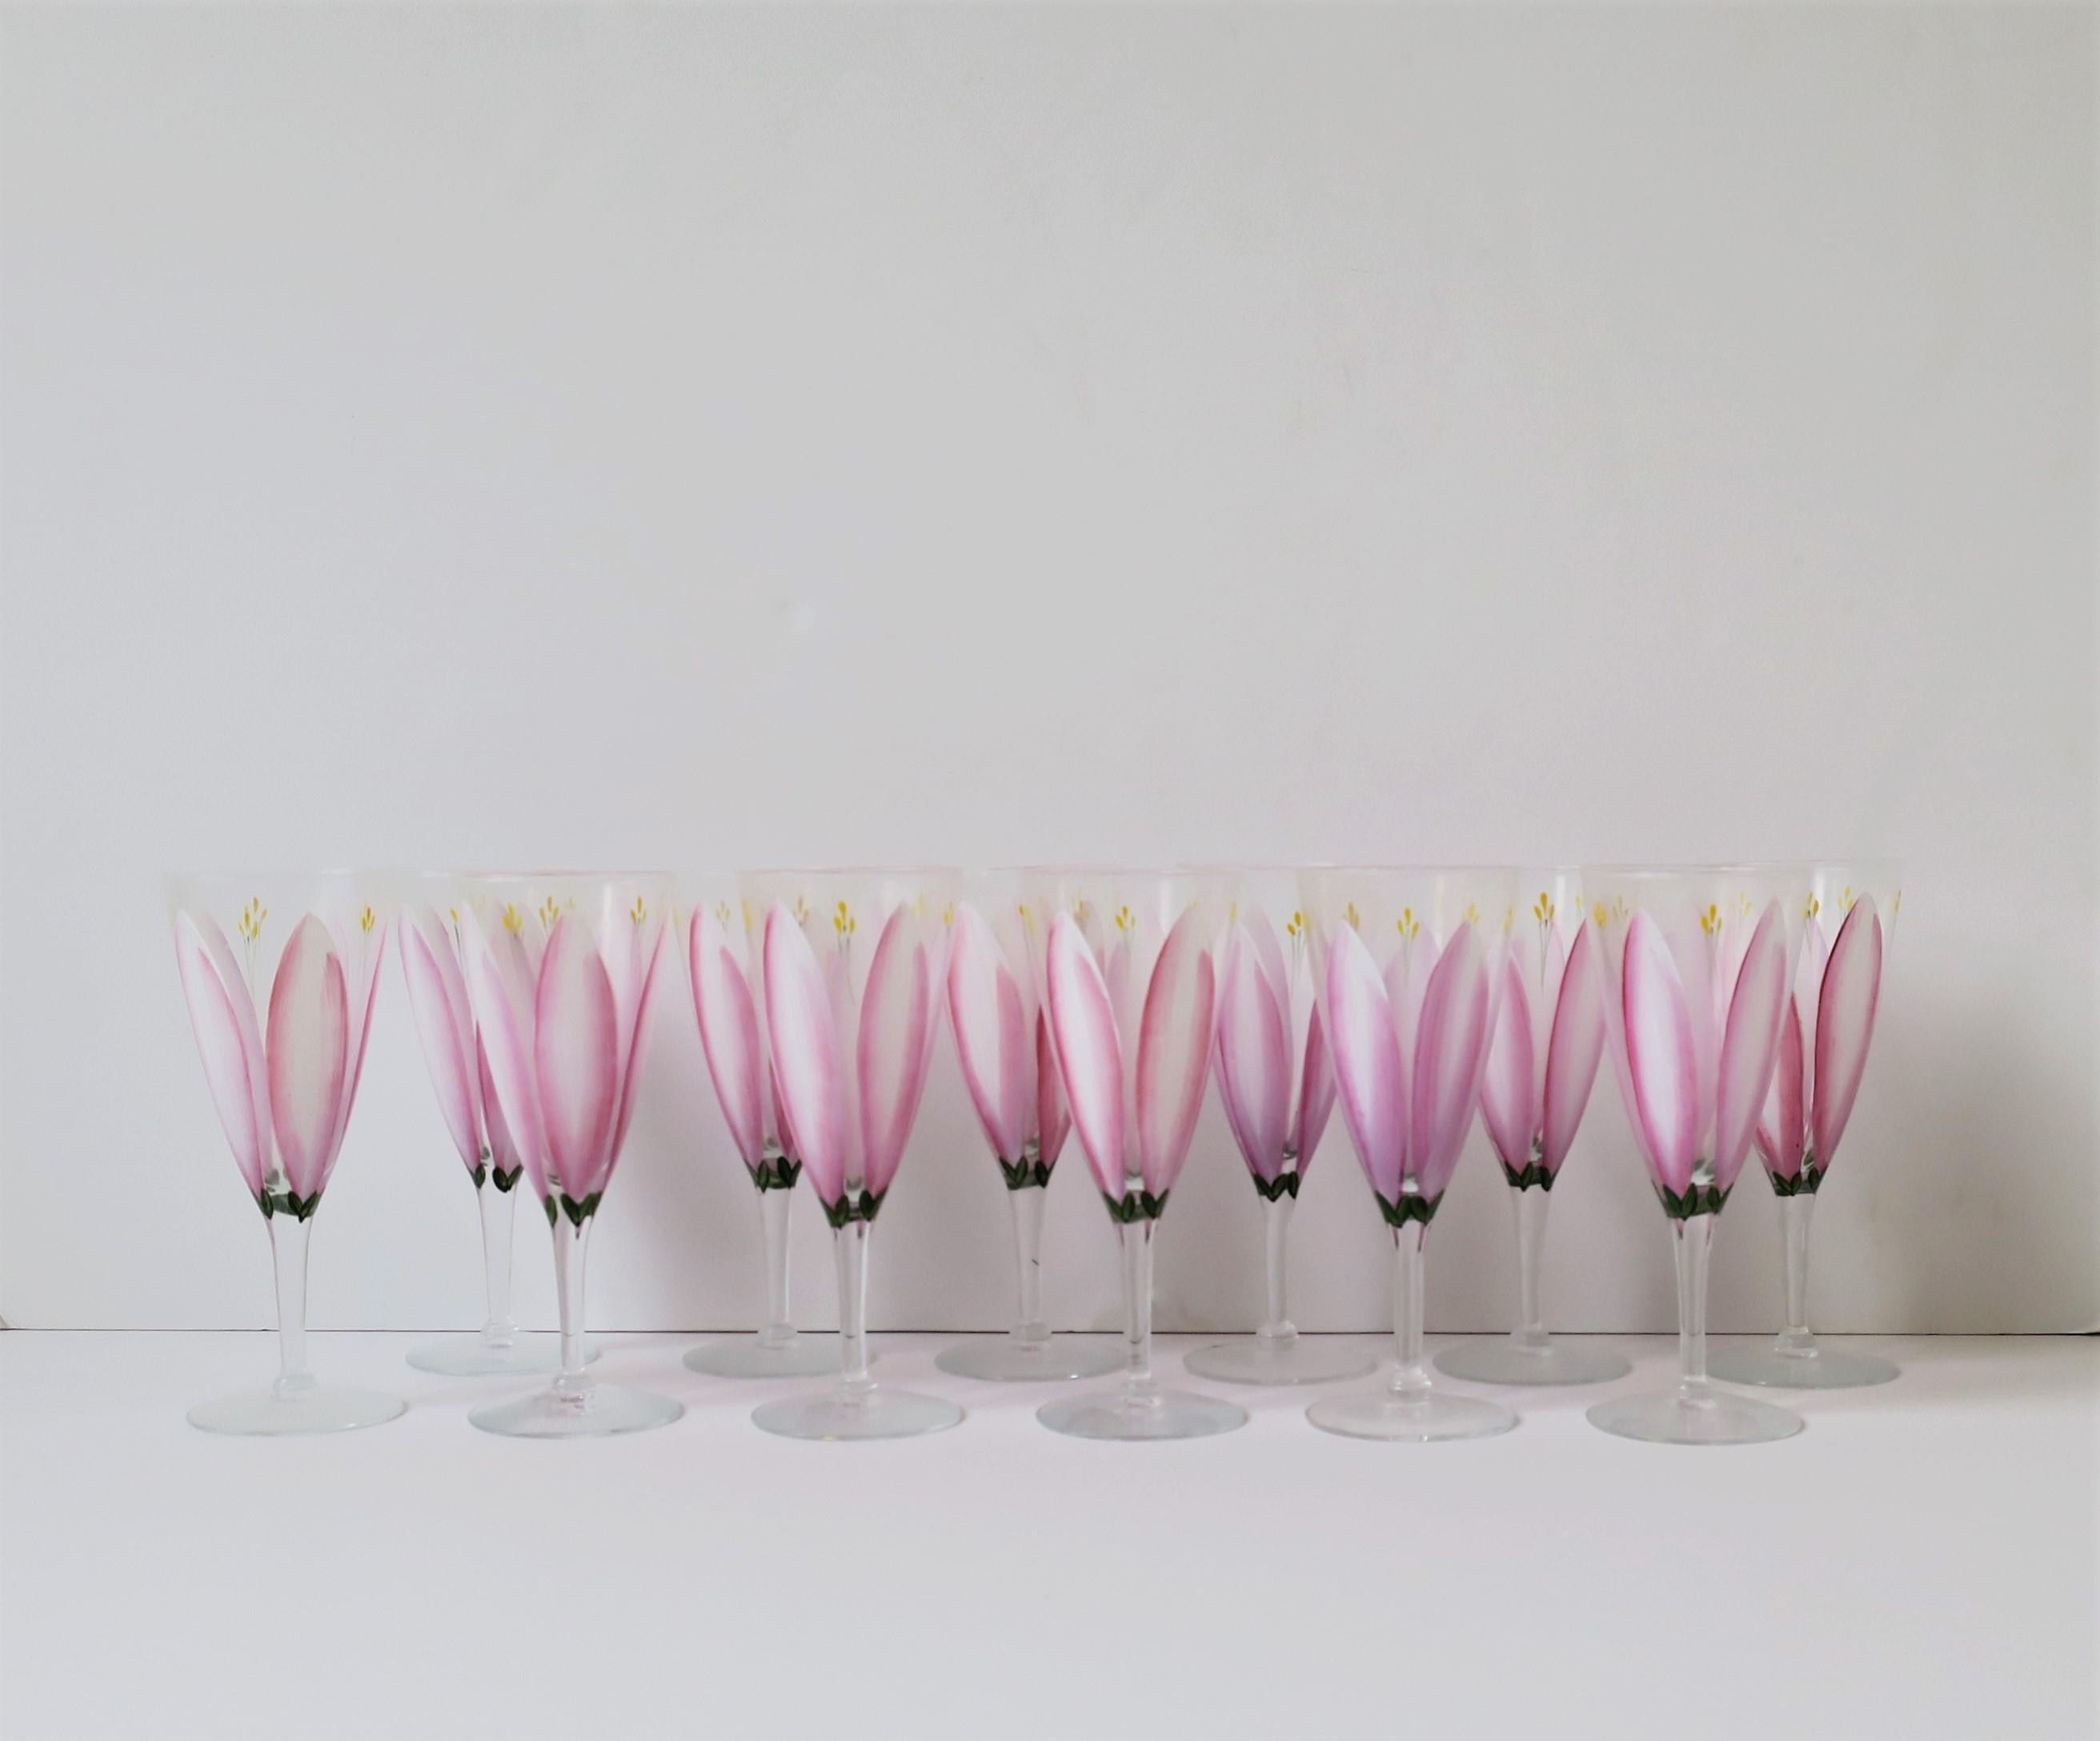 20th Century Champagne Flutes Glasses Hand Painted Pink Tulip Flower Design, Set of 12 For Sale